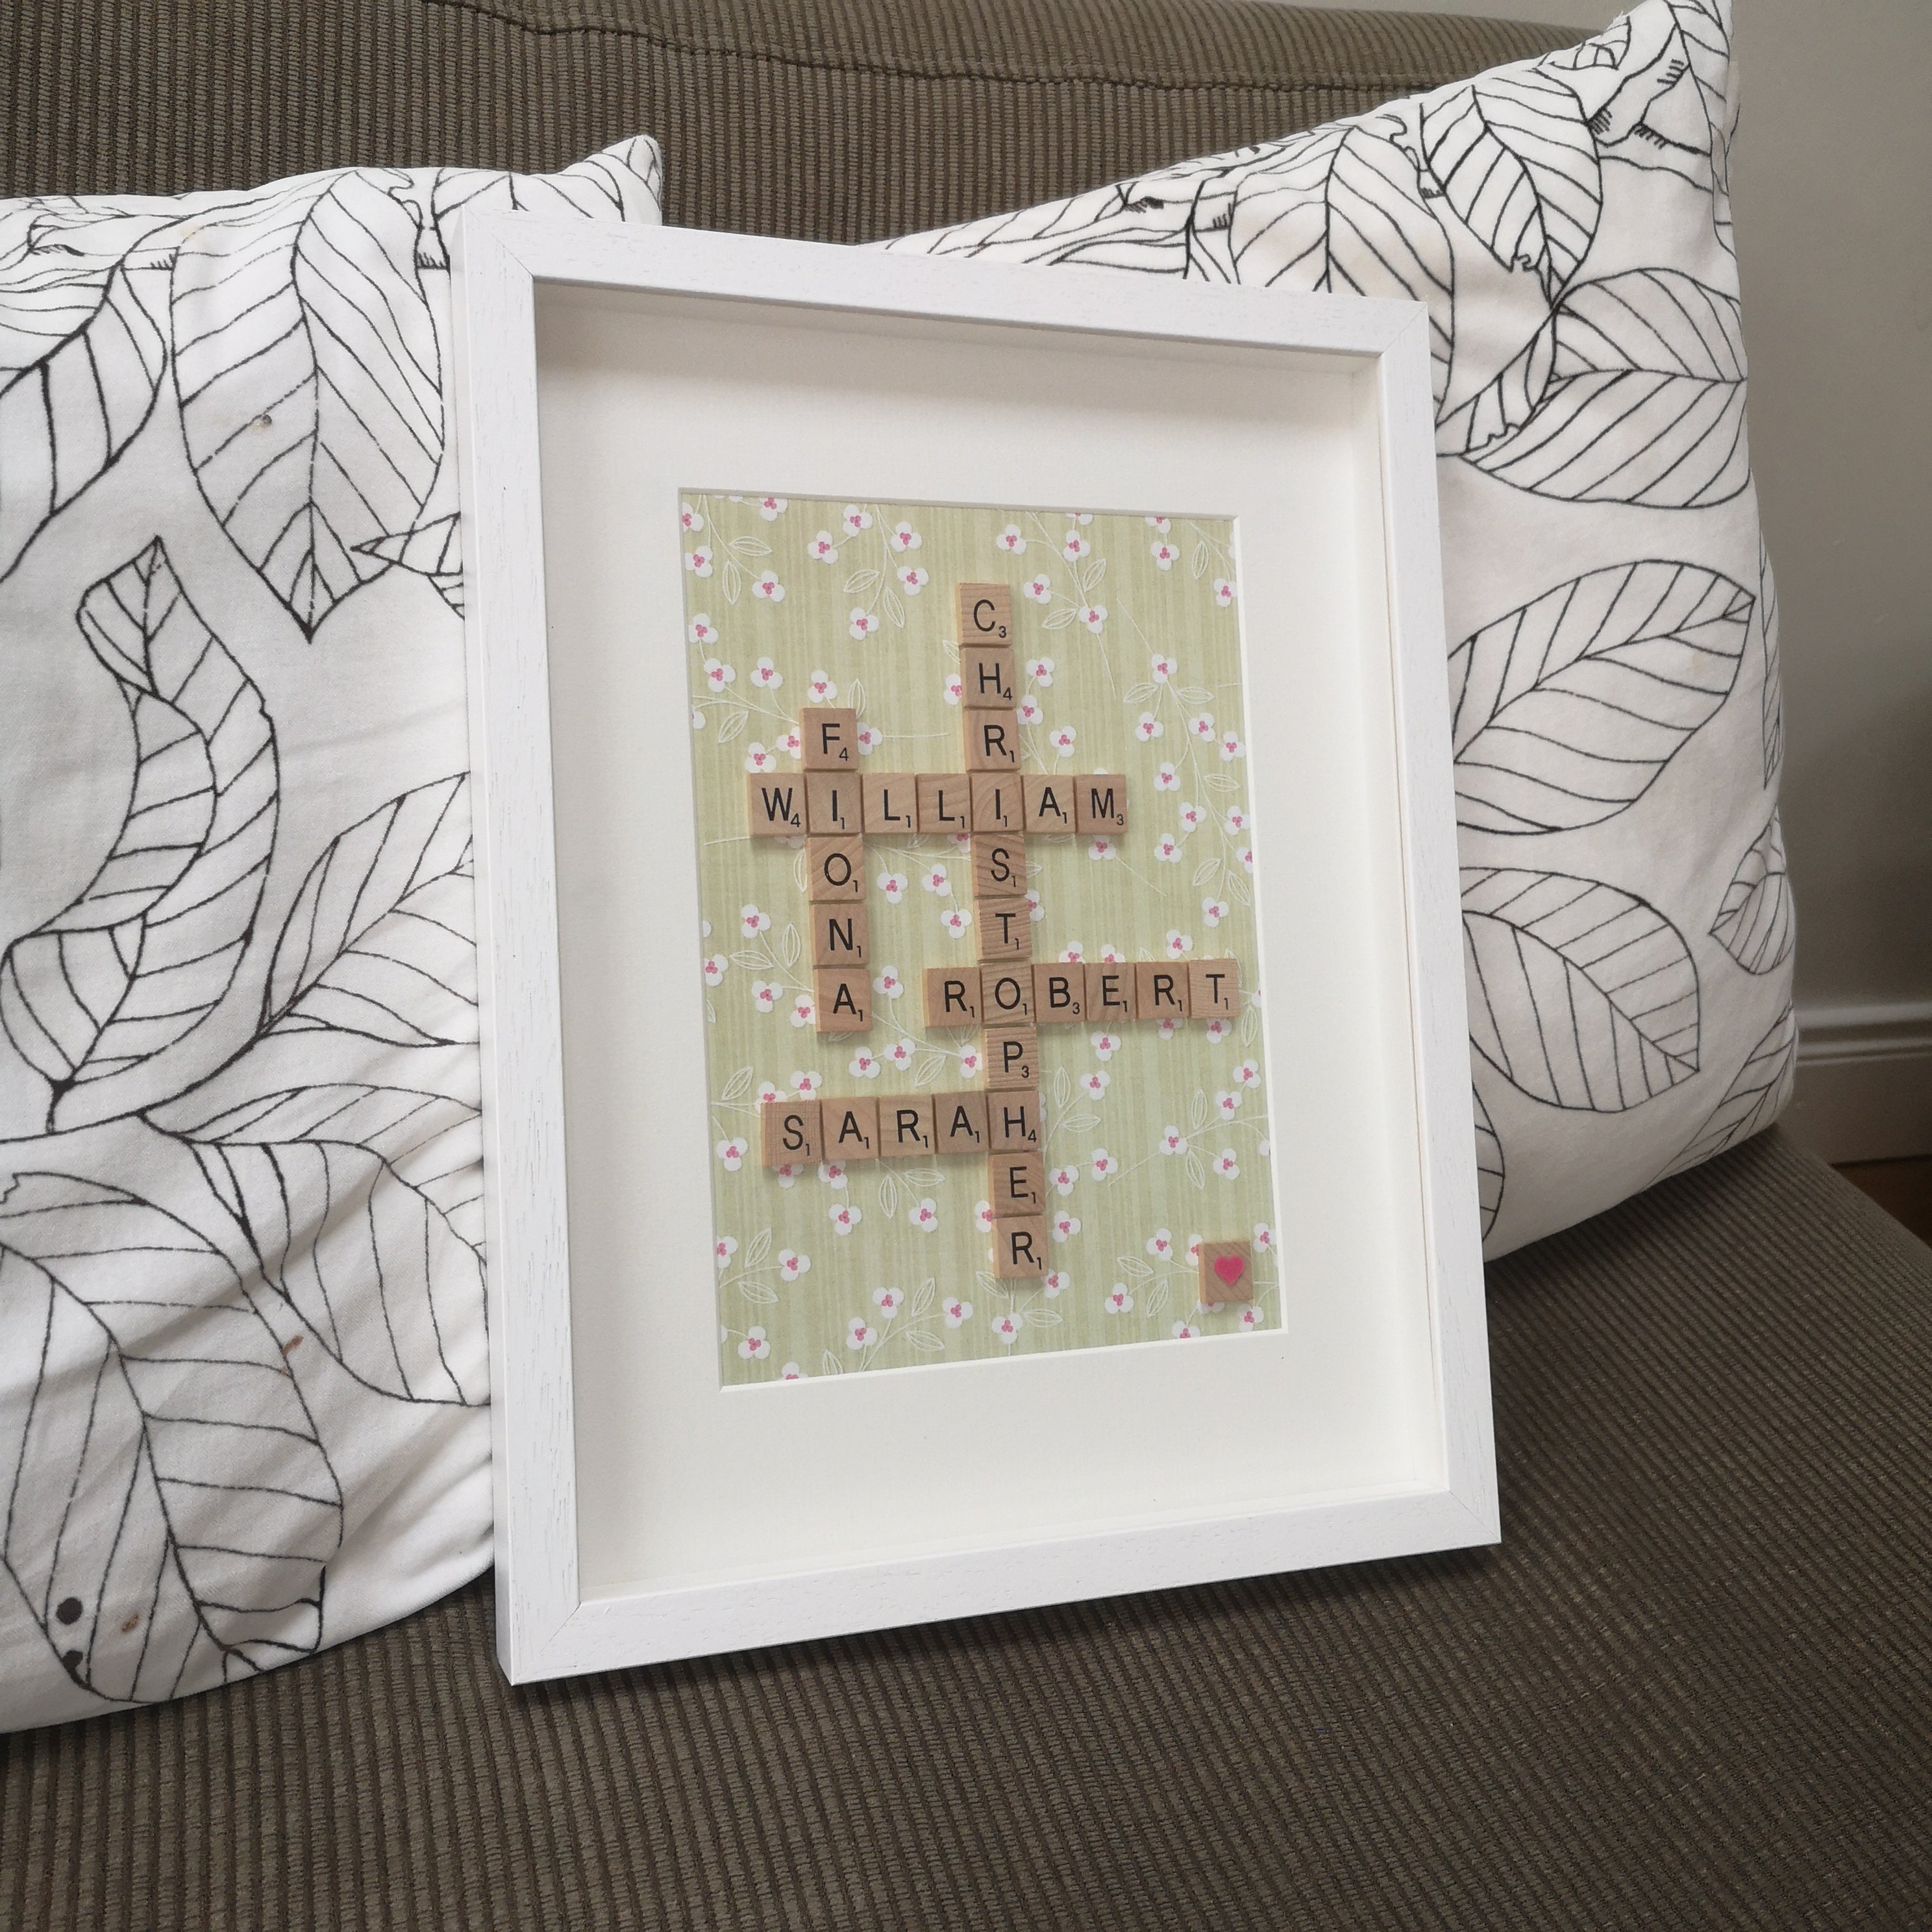 Personalised Family Scrabble name white wooden Frame with 5 names on floral background